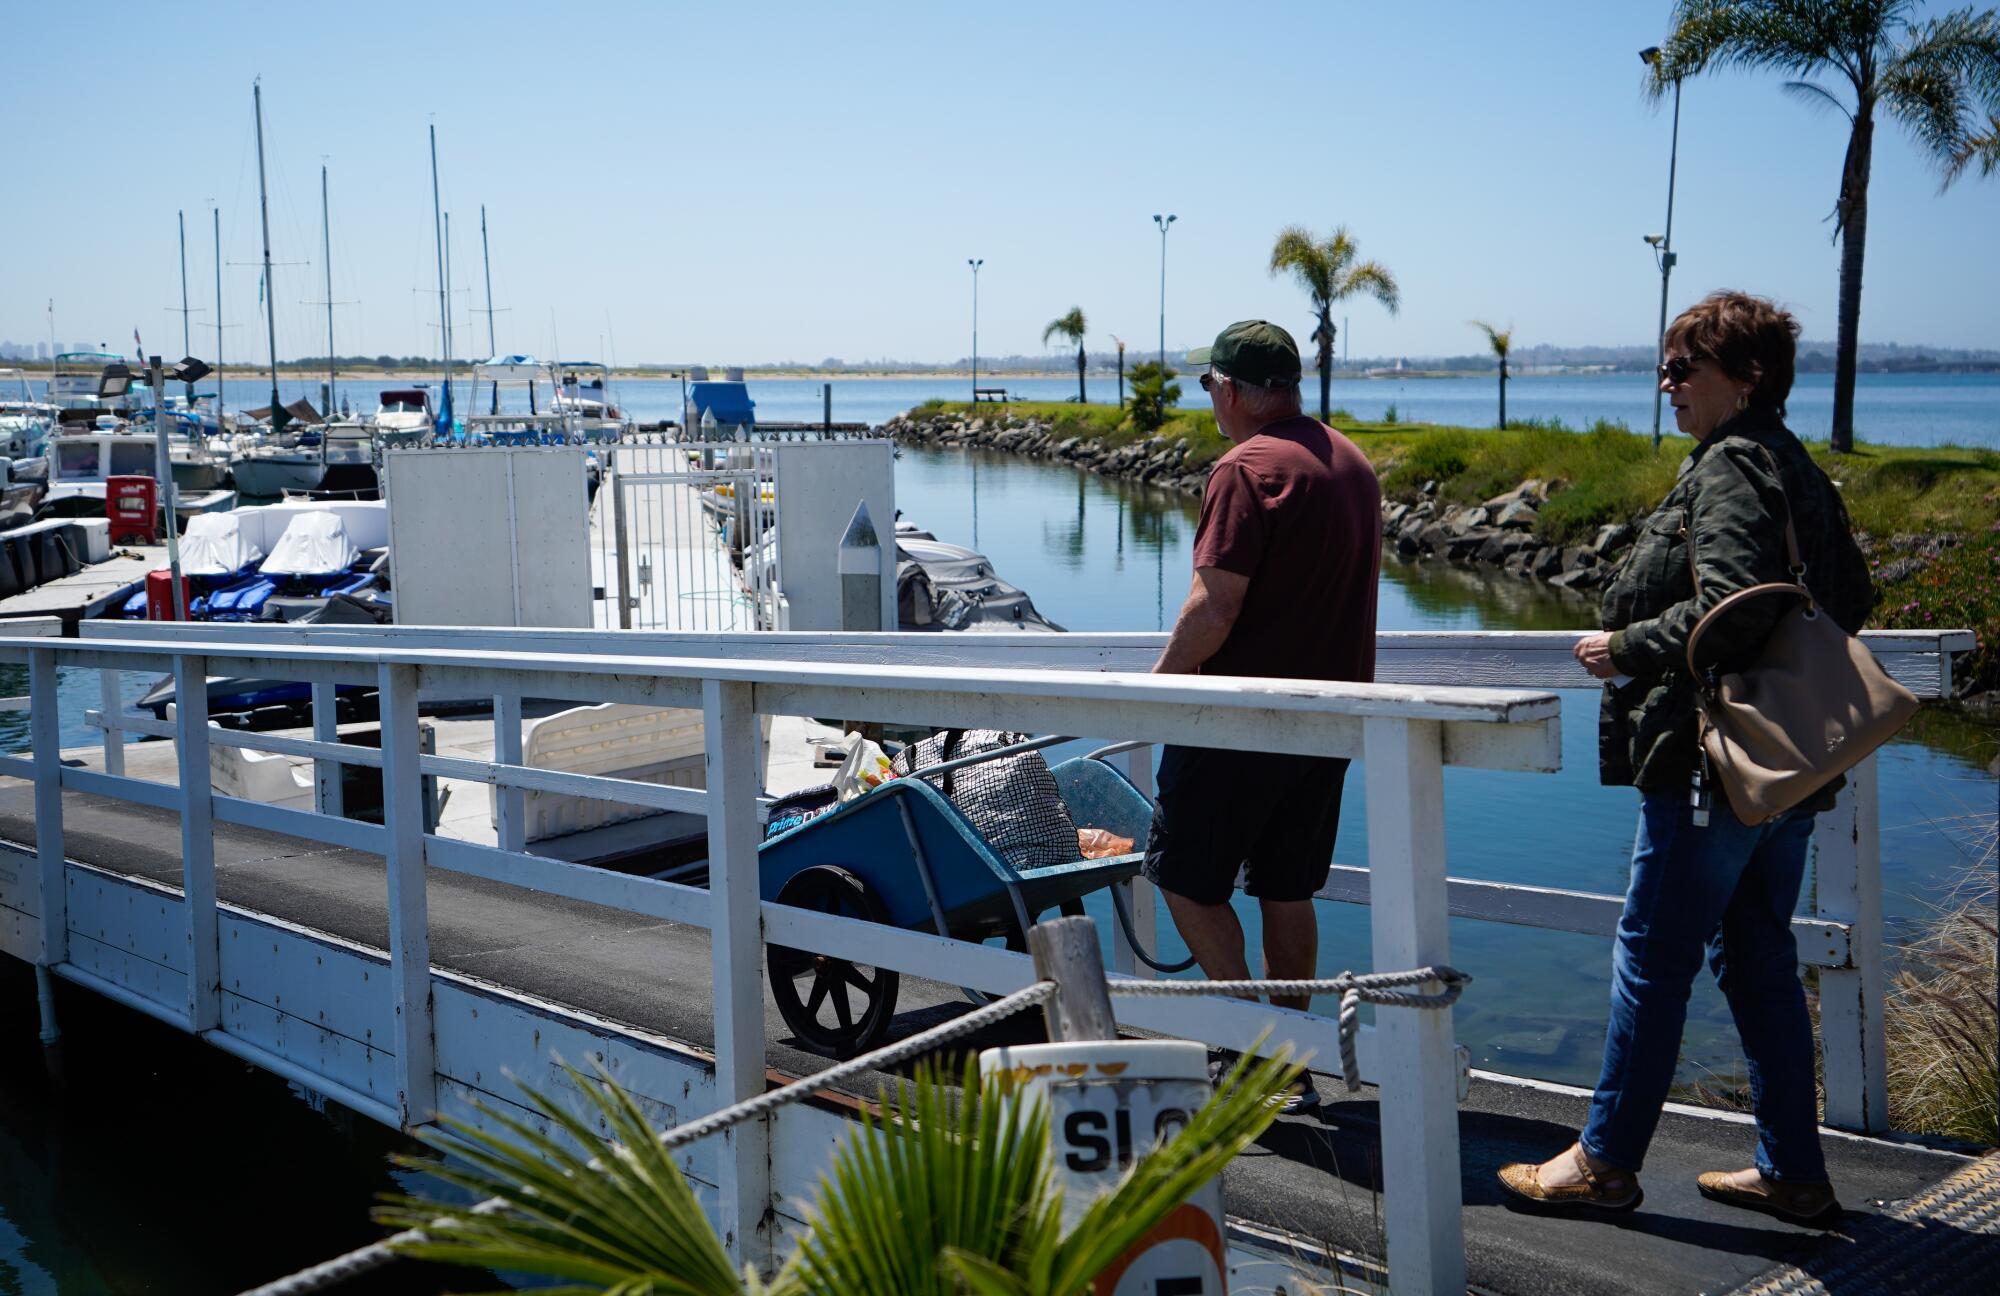 Two people walk across a wooden pedestrian bridge onto a dock at a marina flanked by palm trees.